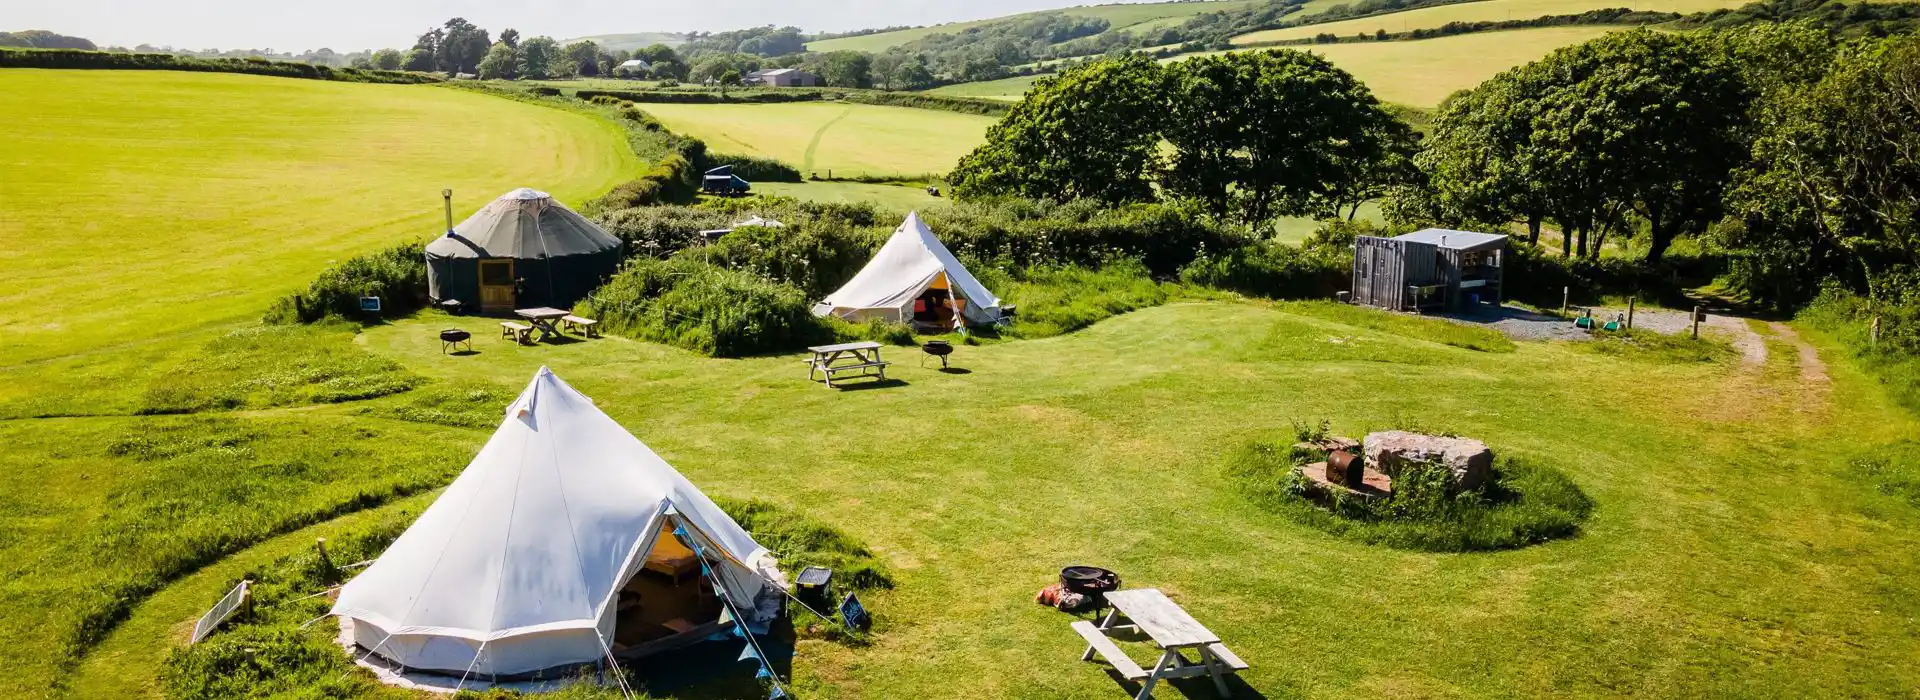 glamping in Wales